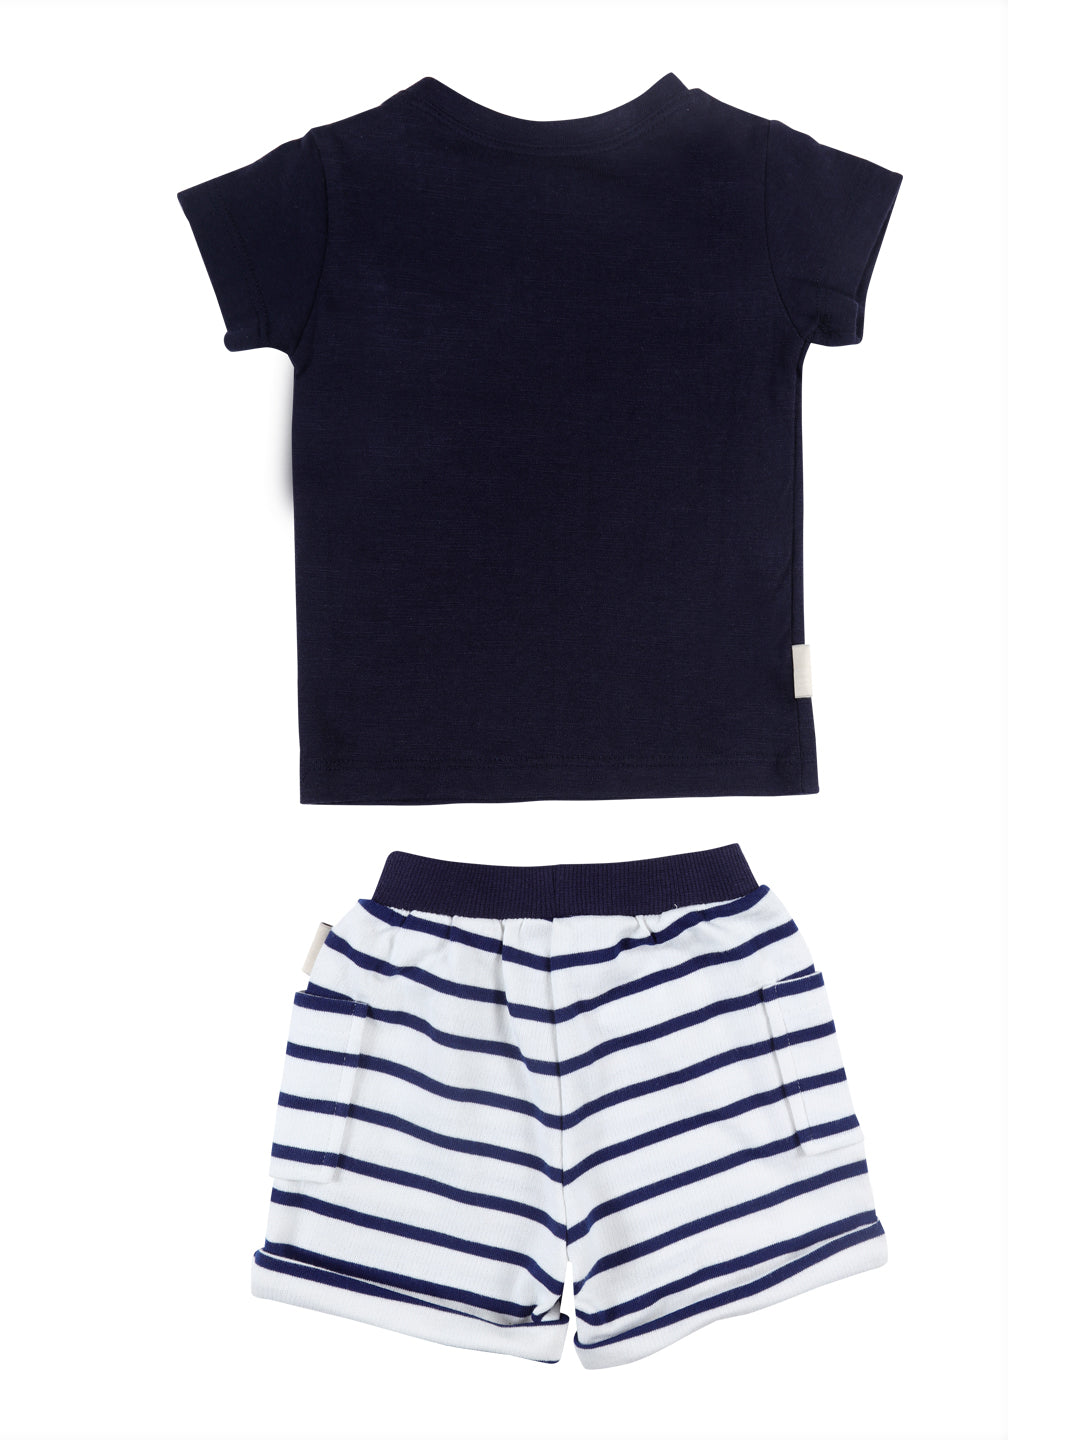 Baby Boys Navy Blue Solid Knits Co-Ordinate 2 Piece